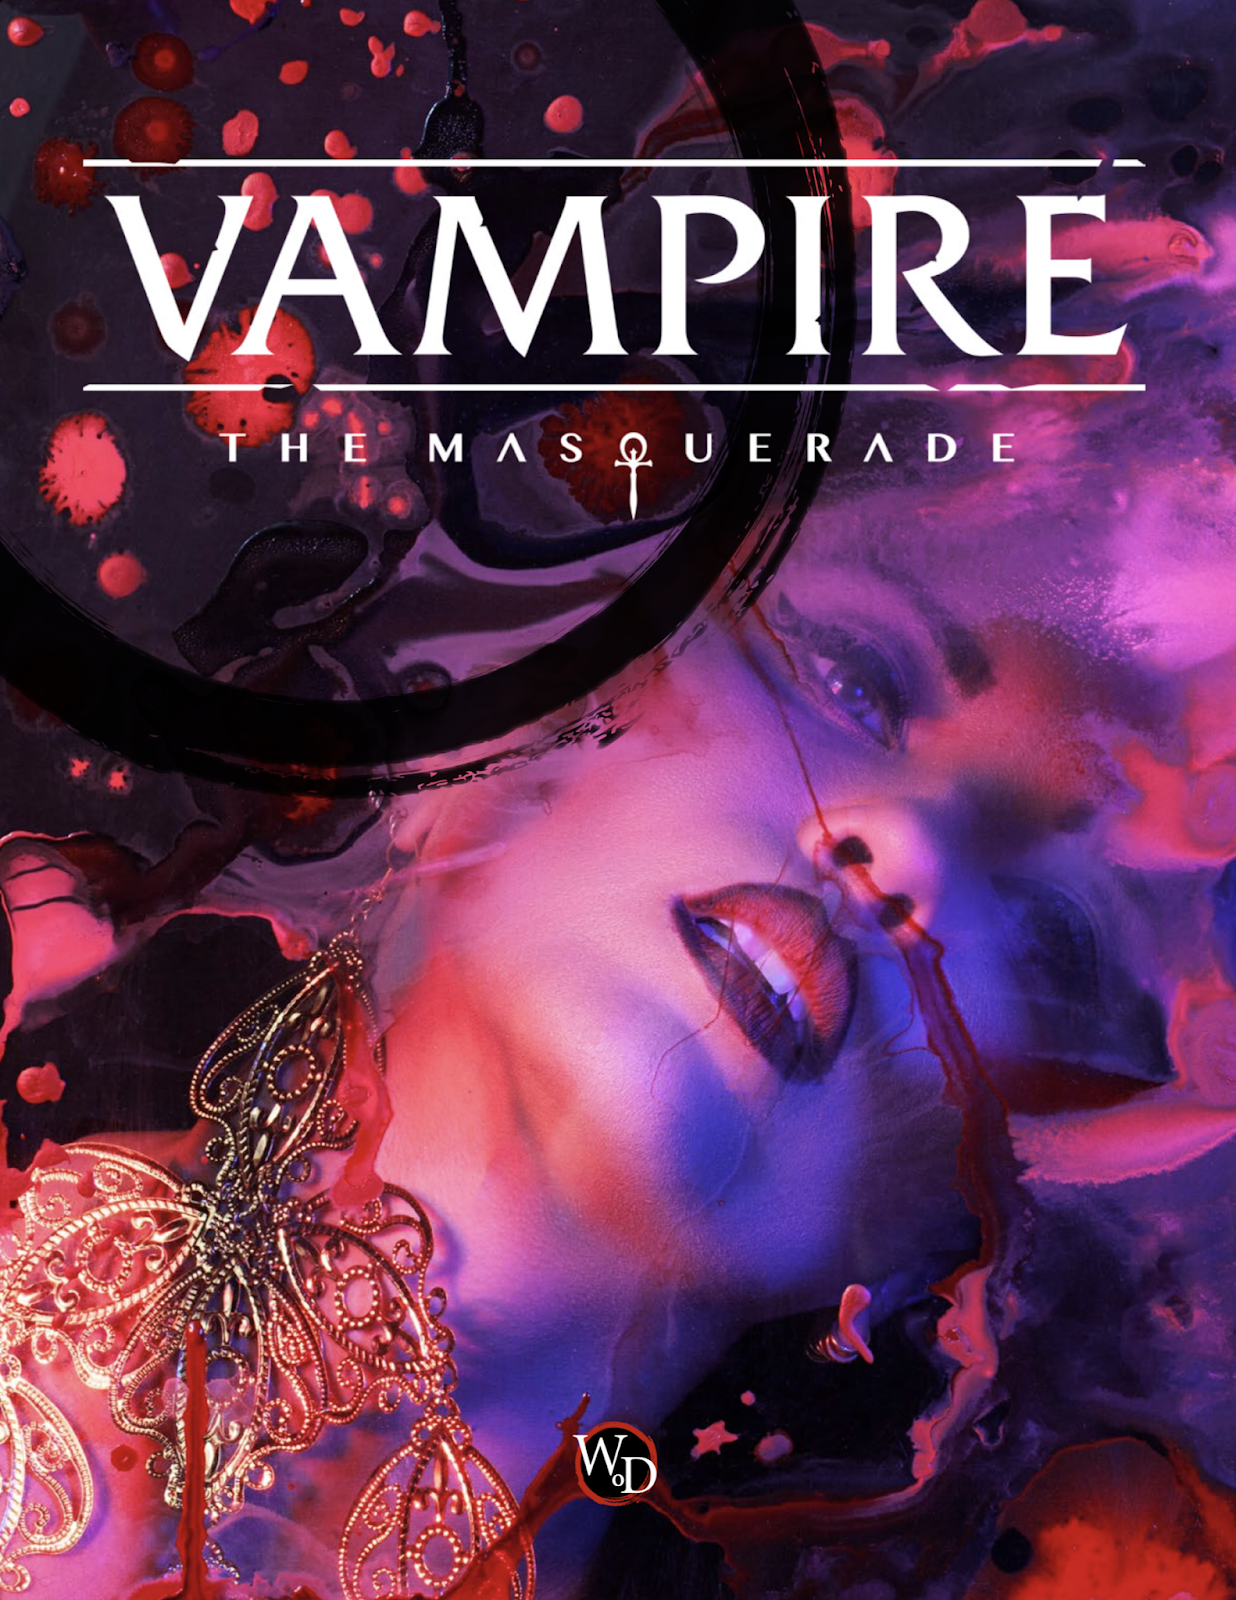 Is Vampire: The Masquerade - Bloodlines 2 Rising from its Coffin?